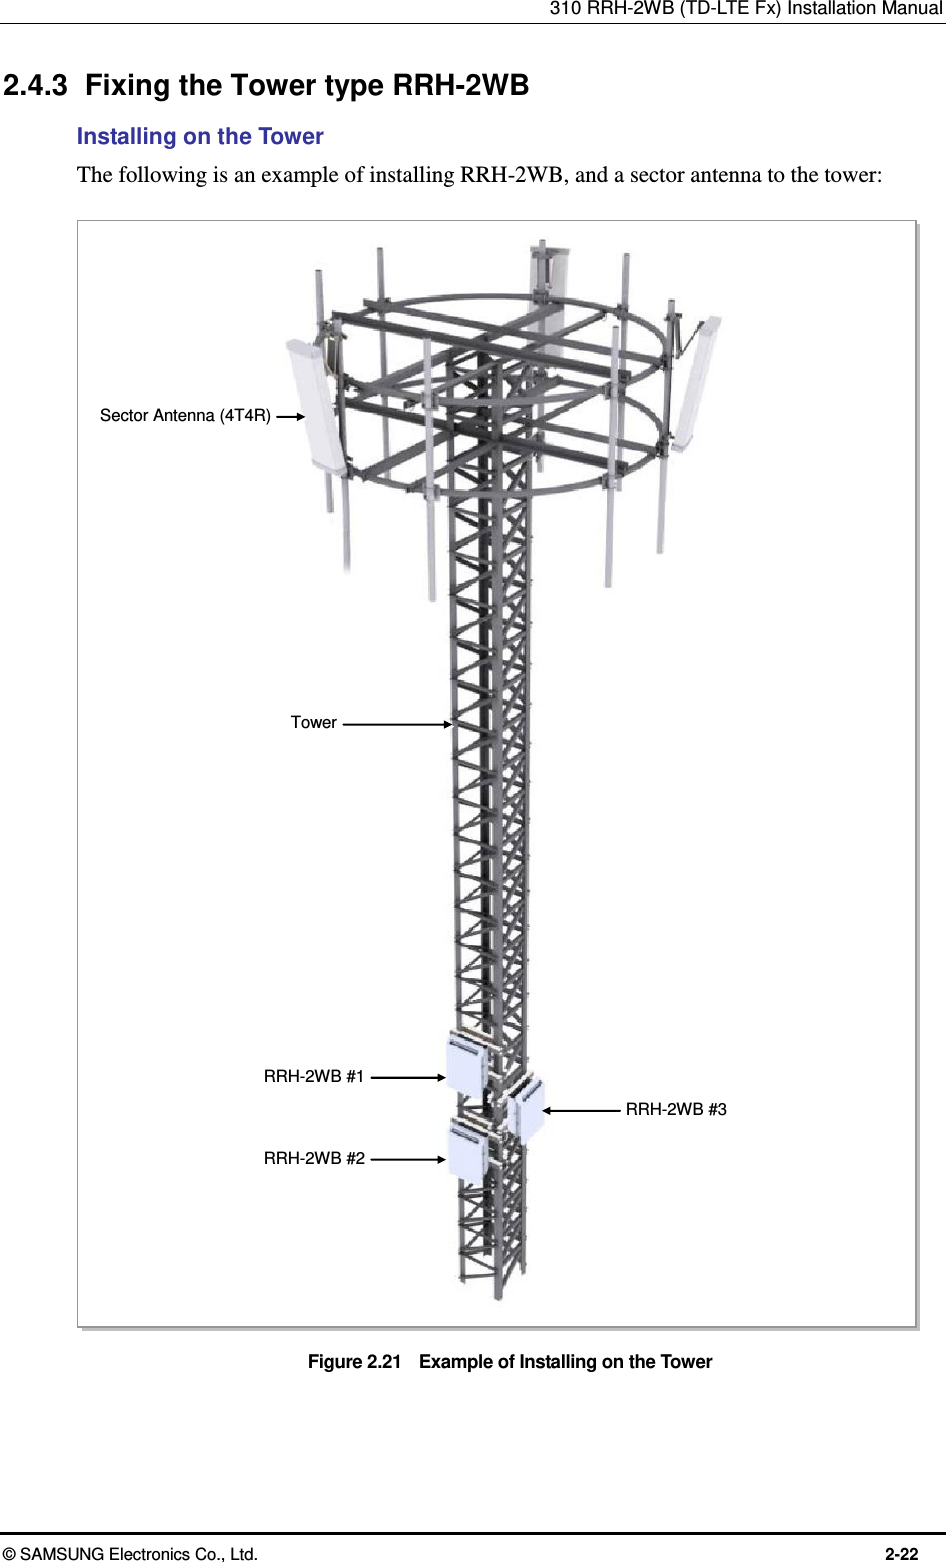 310 RRH-2WB (TD-LTE Fx) Installation Manual  © SAMSUNG Electronics Co., Ltd.  2-22 2.4.3  Fixing the Tower type RRH-2WB Installing on the Tower The following is an example of installing RRH-2WB, and a sector antenna to the tower:  Figure 2.21    Example of Installing on the Tower  Sector Antenna (4T4R) Tower RRH-2WB #2 RRH-2WB #1 RRH-2WB #3 